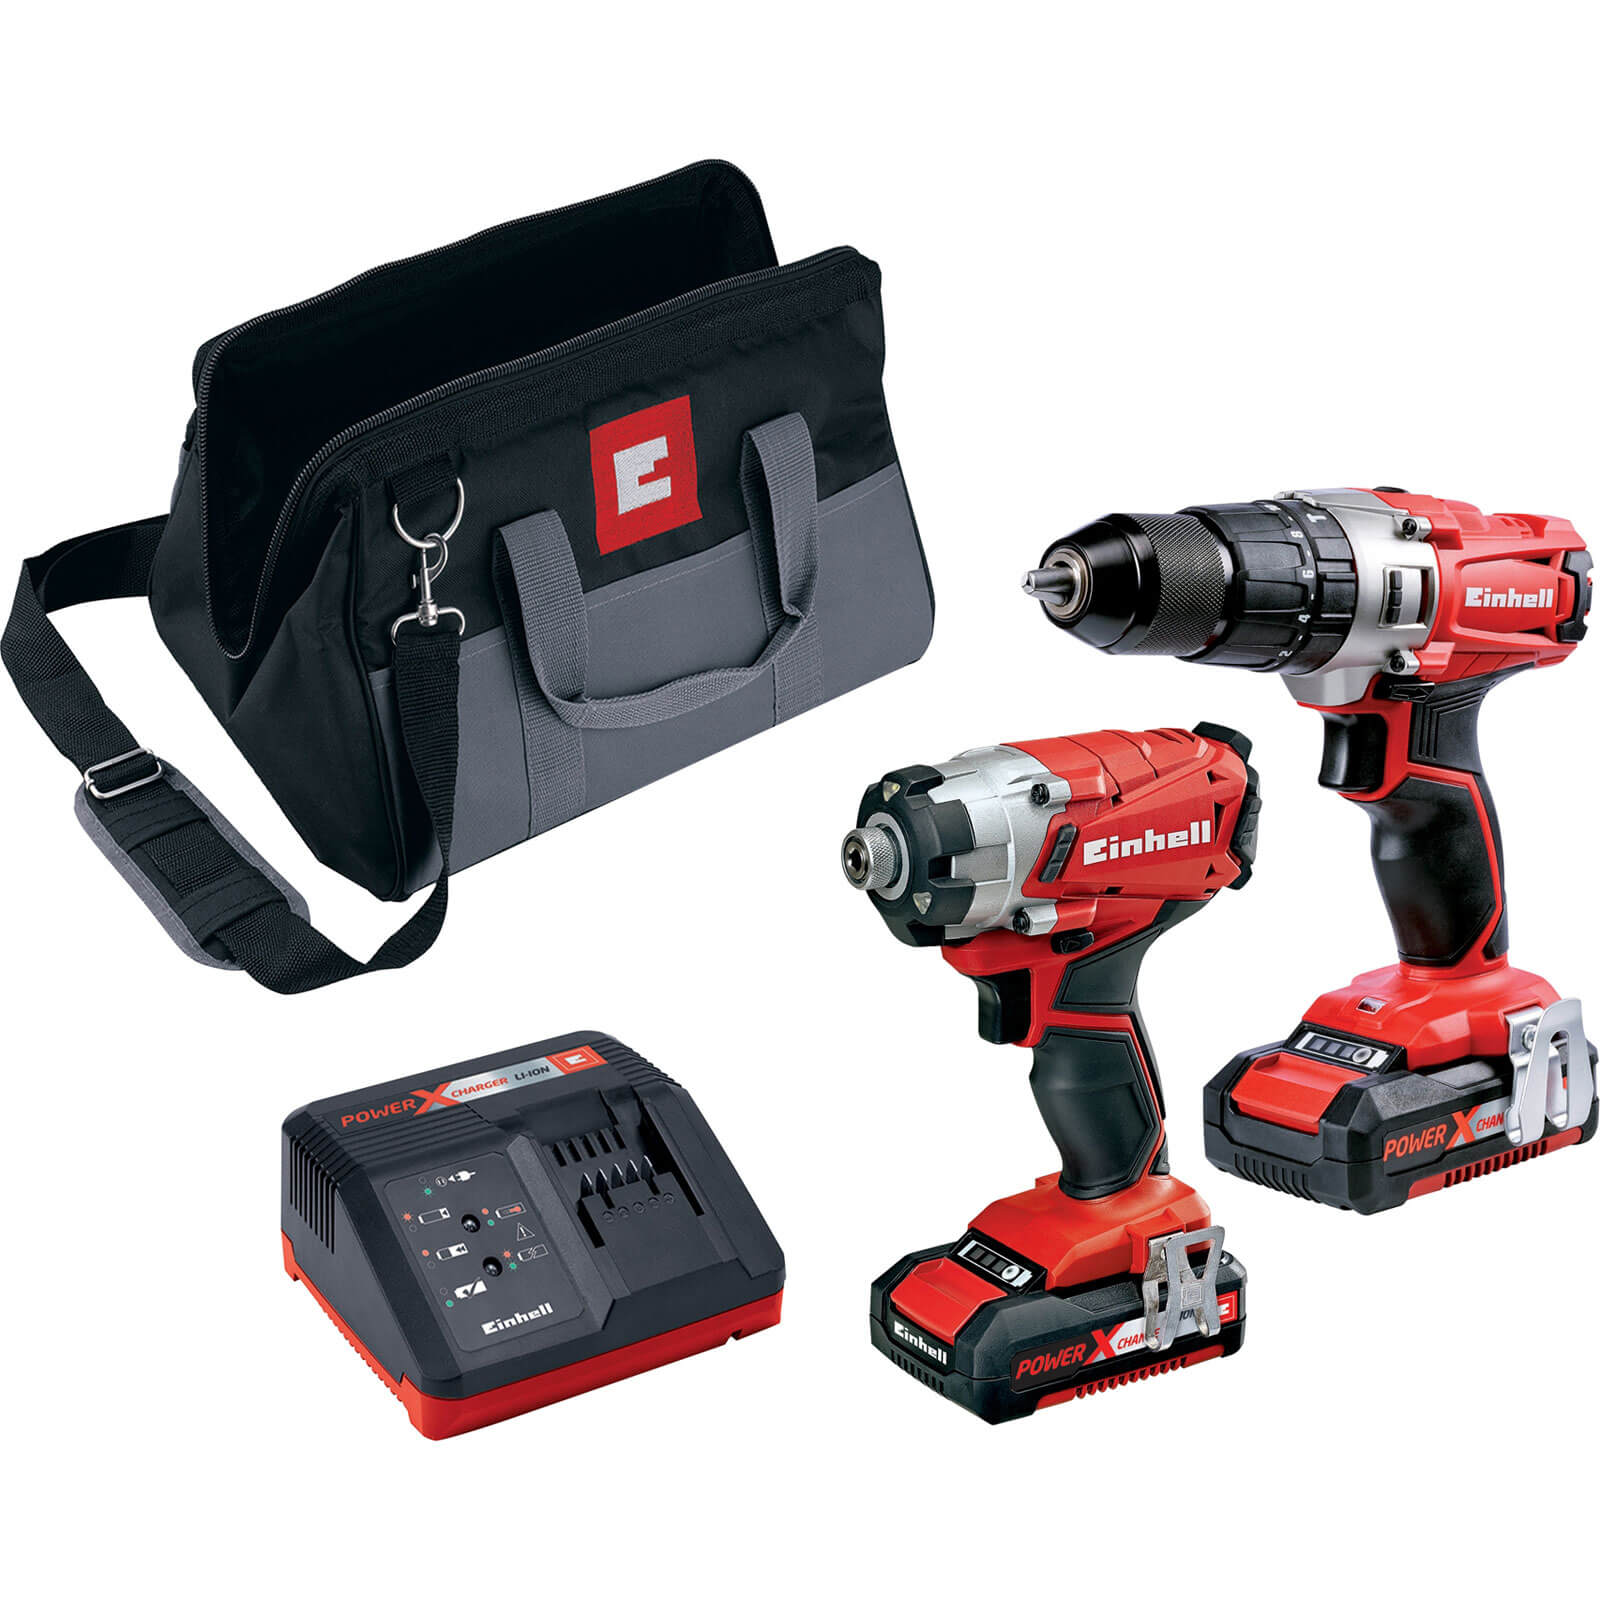 Image of Einhell 18v Cordless Combi Drill and Impact Driver Kit 2 x 2ah Li-ion Charger Bag